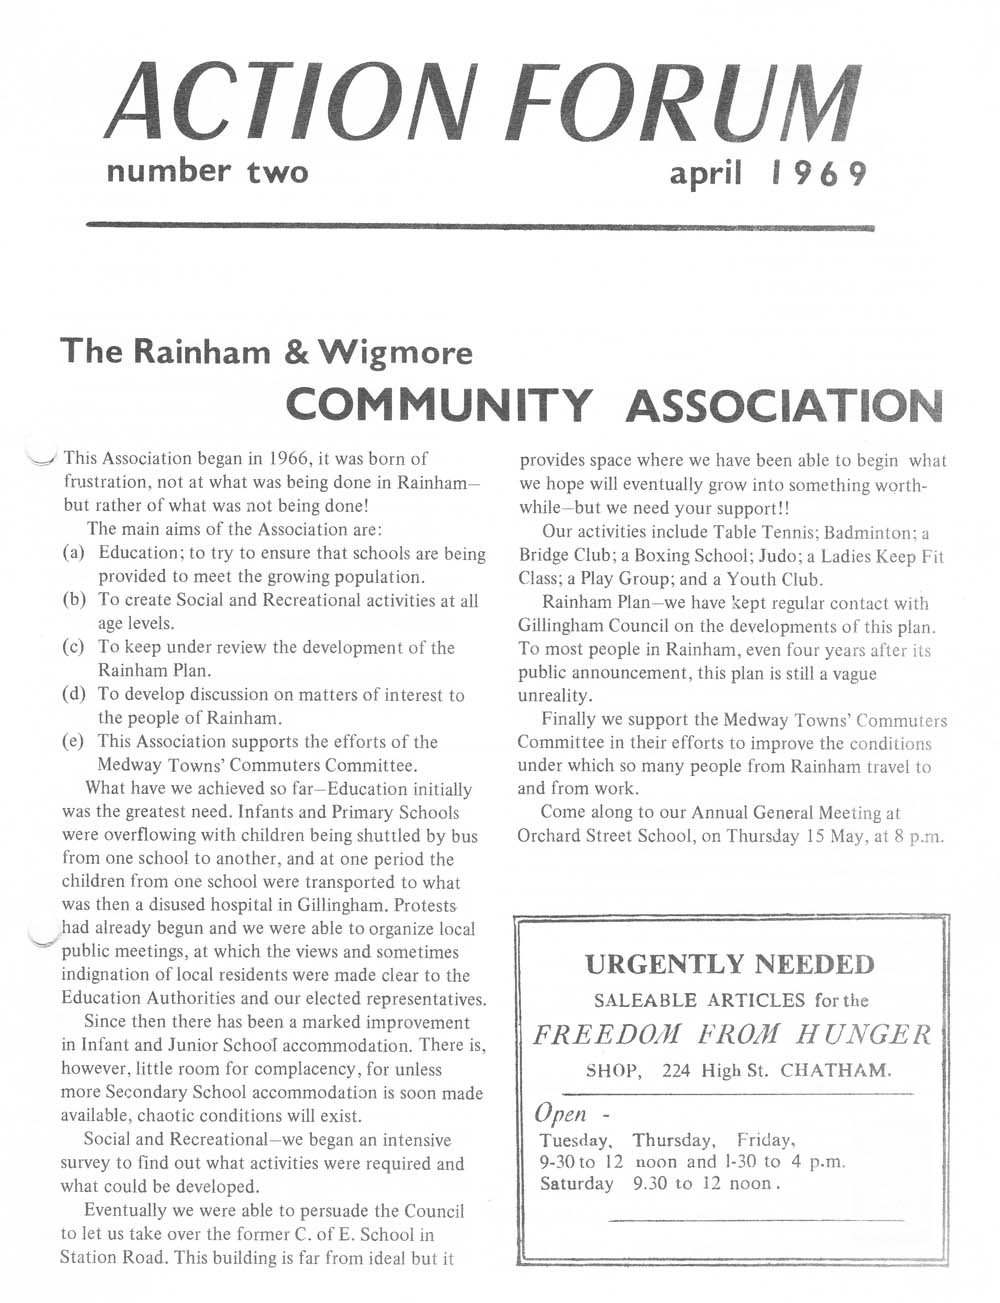 Action Forum magazine number 2, April 1969.   
The cover featured an article about the Rainham and Wigmore Community Association (RWCA) 